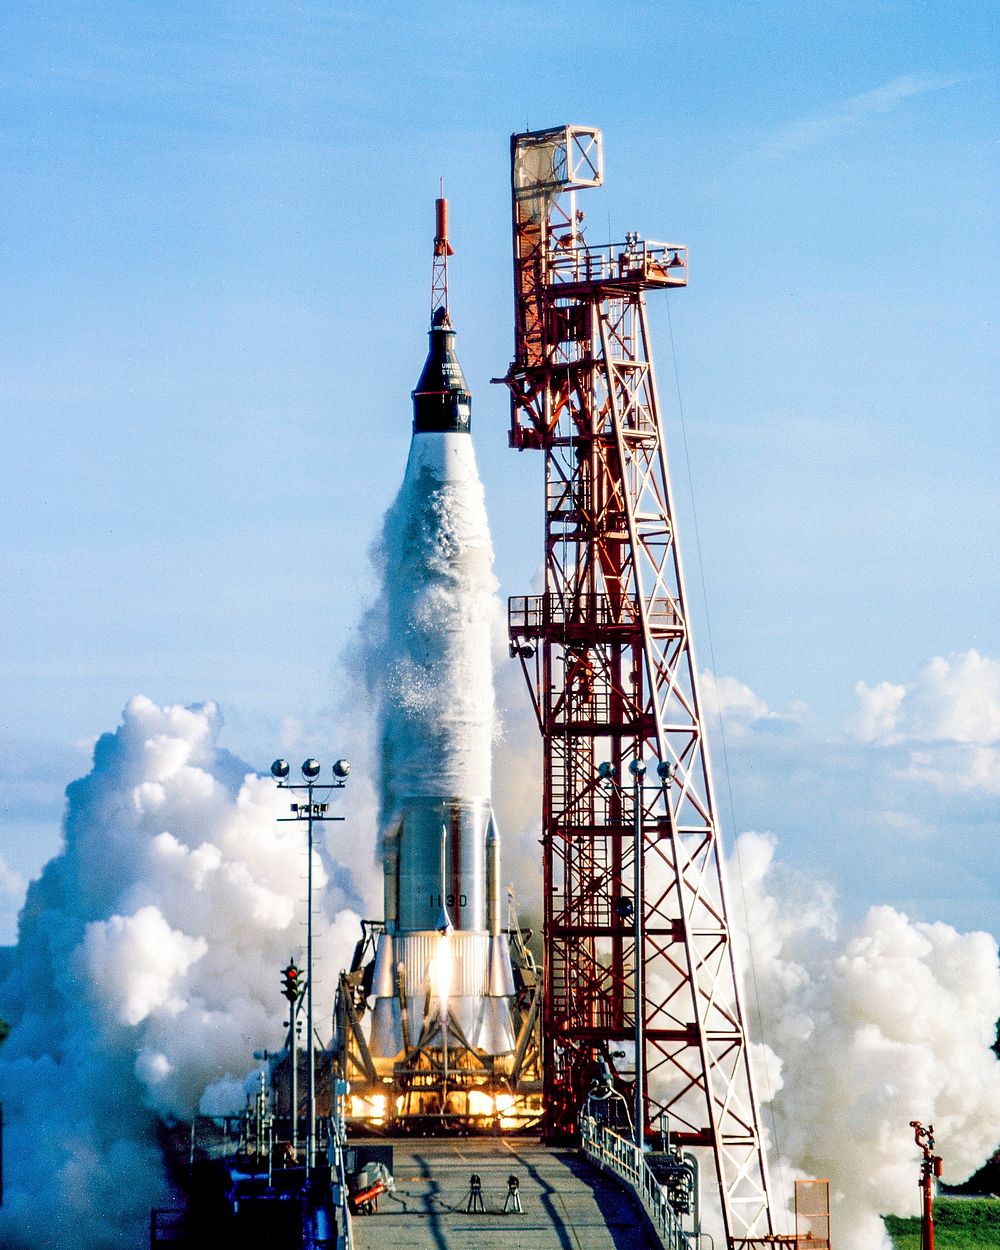 An Atlas launch vehicle lifts off with the Mercury spacecraft Sigma 7 atop with astronaut Walter M. Schirra Jr. aboard.…